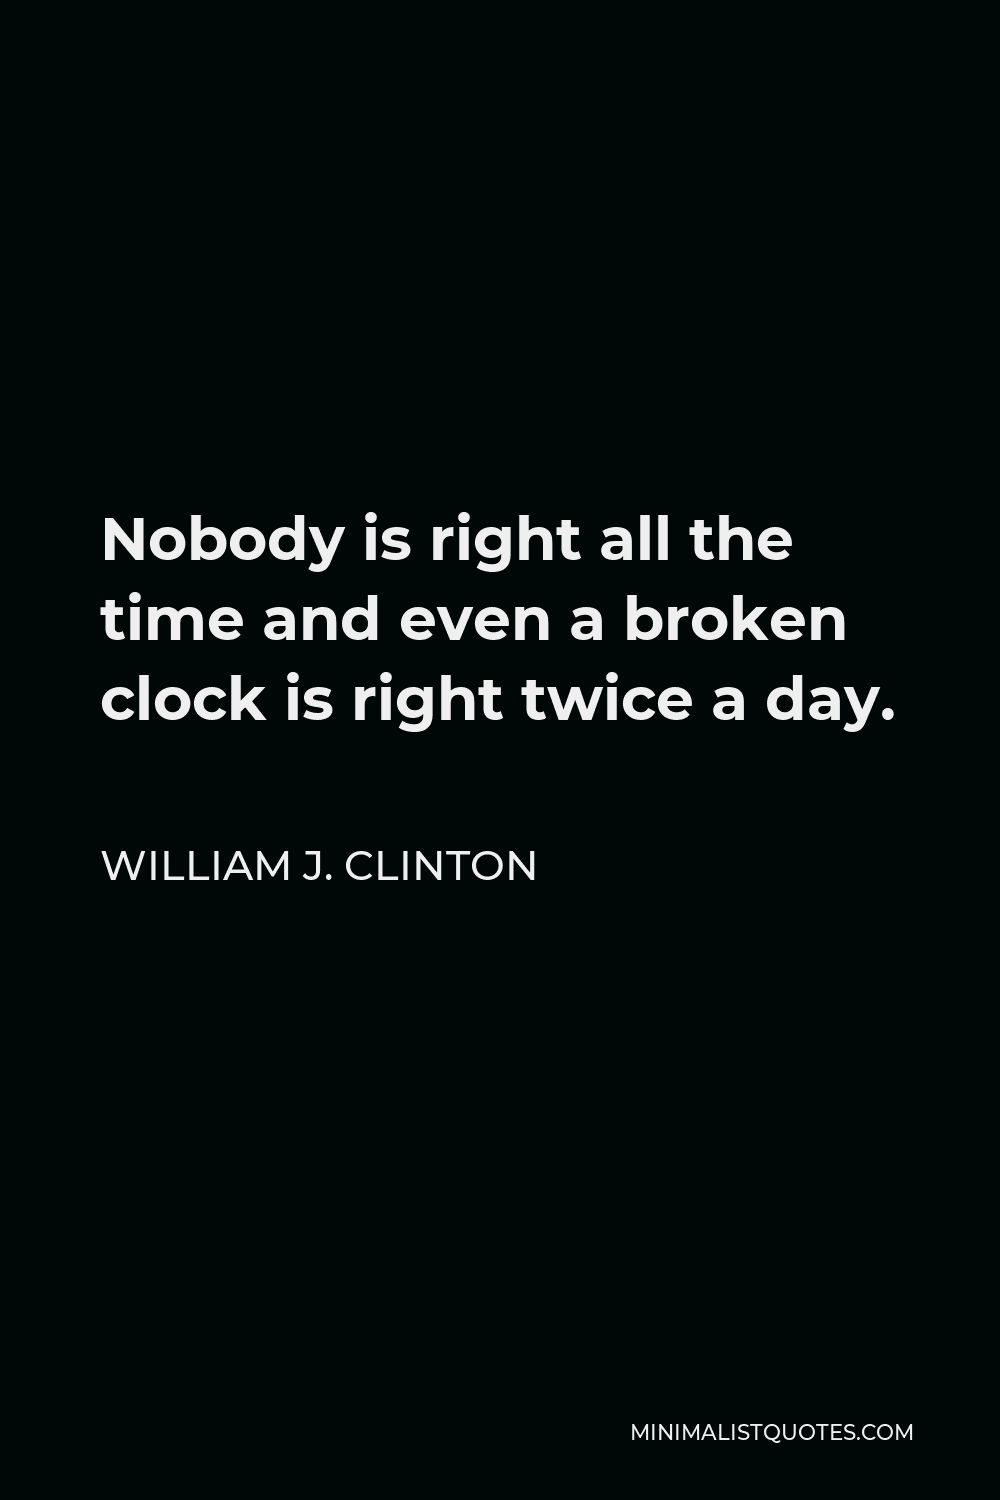 William J. Clinton Quote - Nobody is right all the time and even a broken clock is right twice a day.